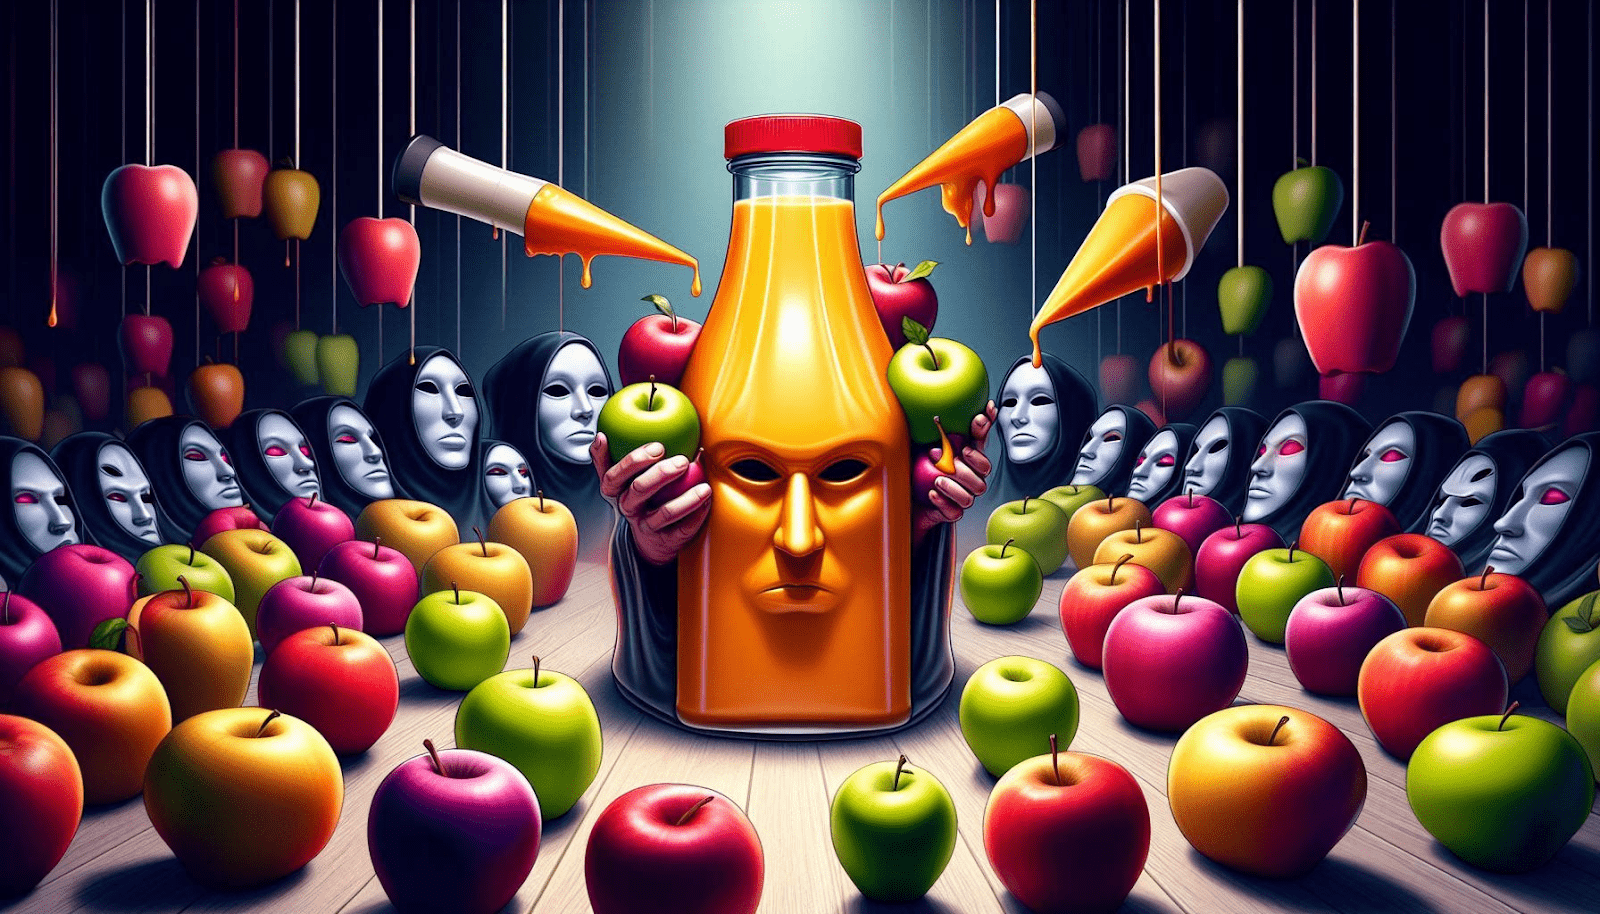 The Illusion of Choice: The Apple Juice Controversy Exposed